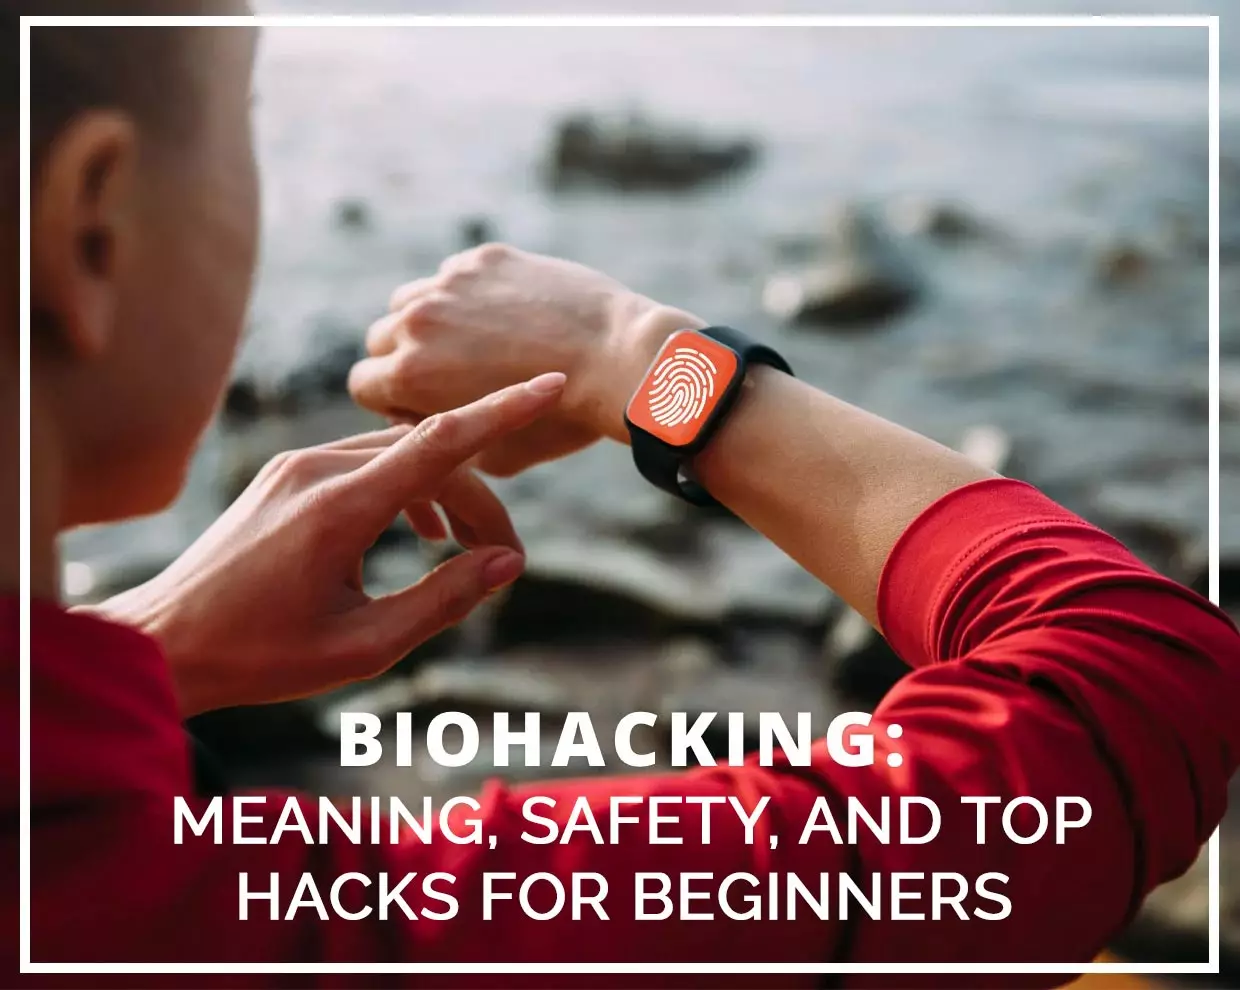 Biohacking: Meaning, Safety and Top Hacks for Beginners